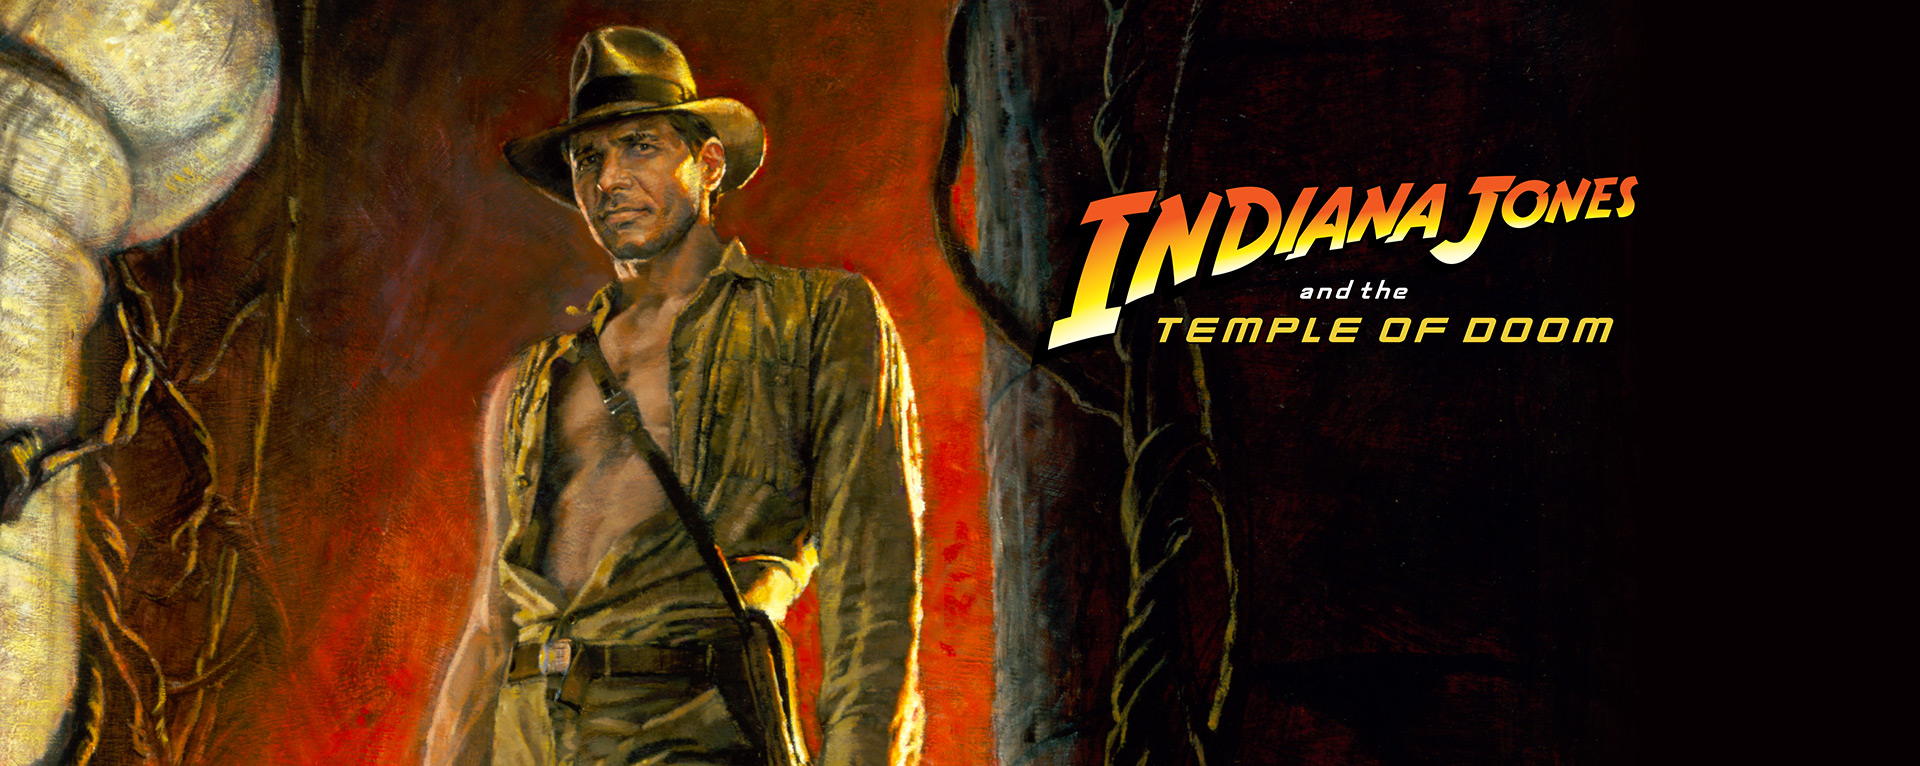 Indiana Jones Collection Coming Soon To Disney+ – What's On Disney Plus